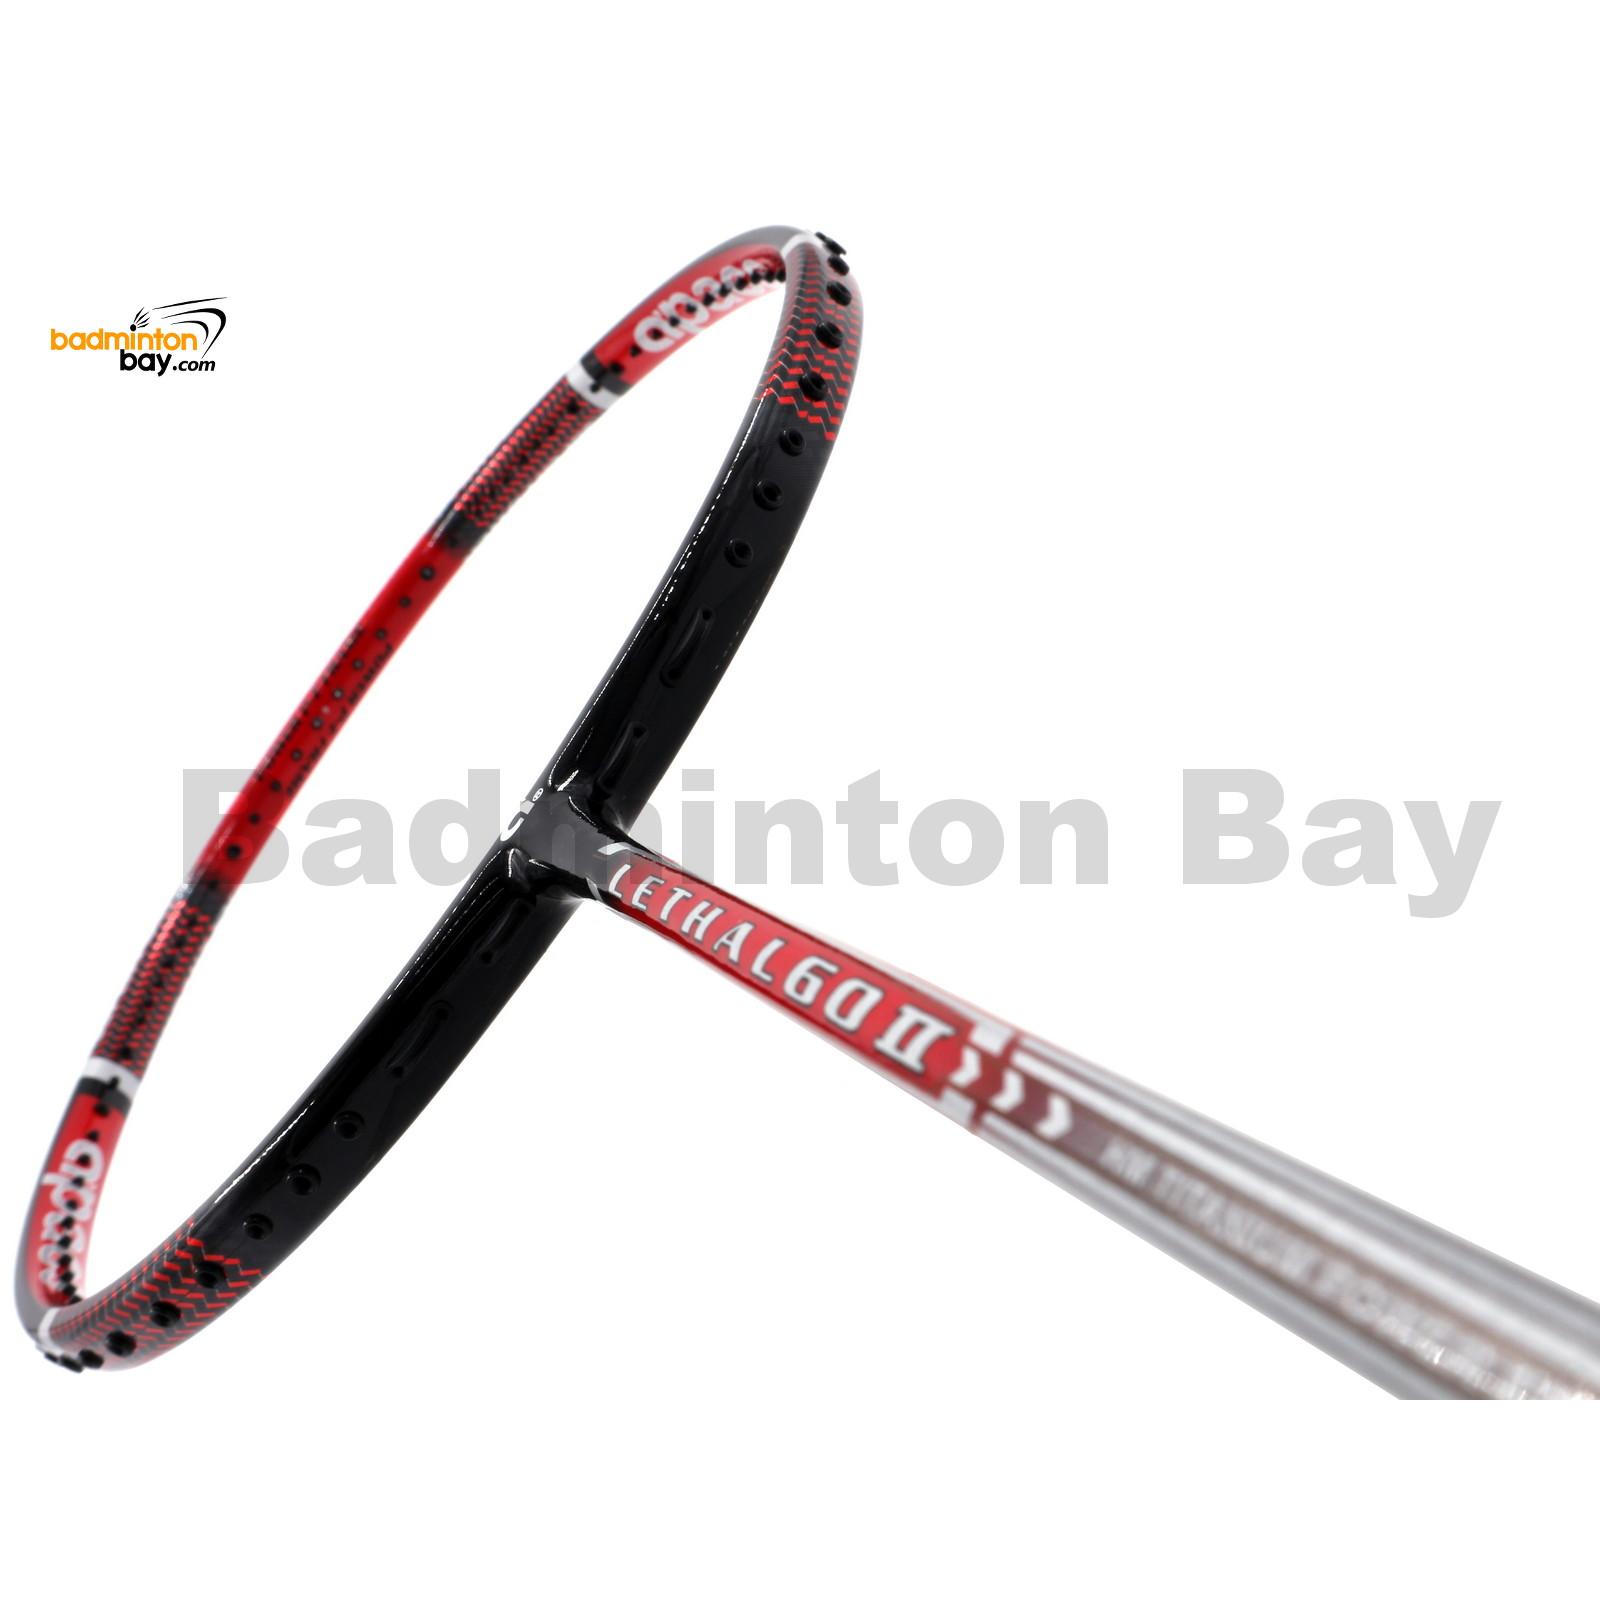 APACS LETHAL 60 BADMINTON RACKET FREE STRING AND OVERGRIP 